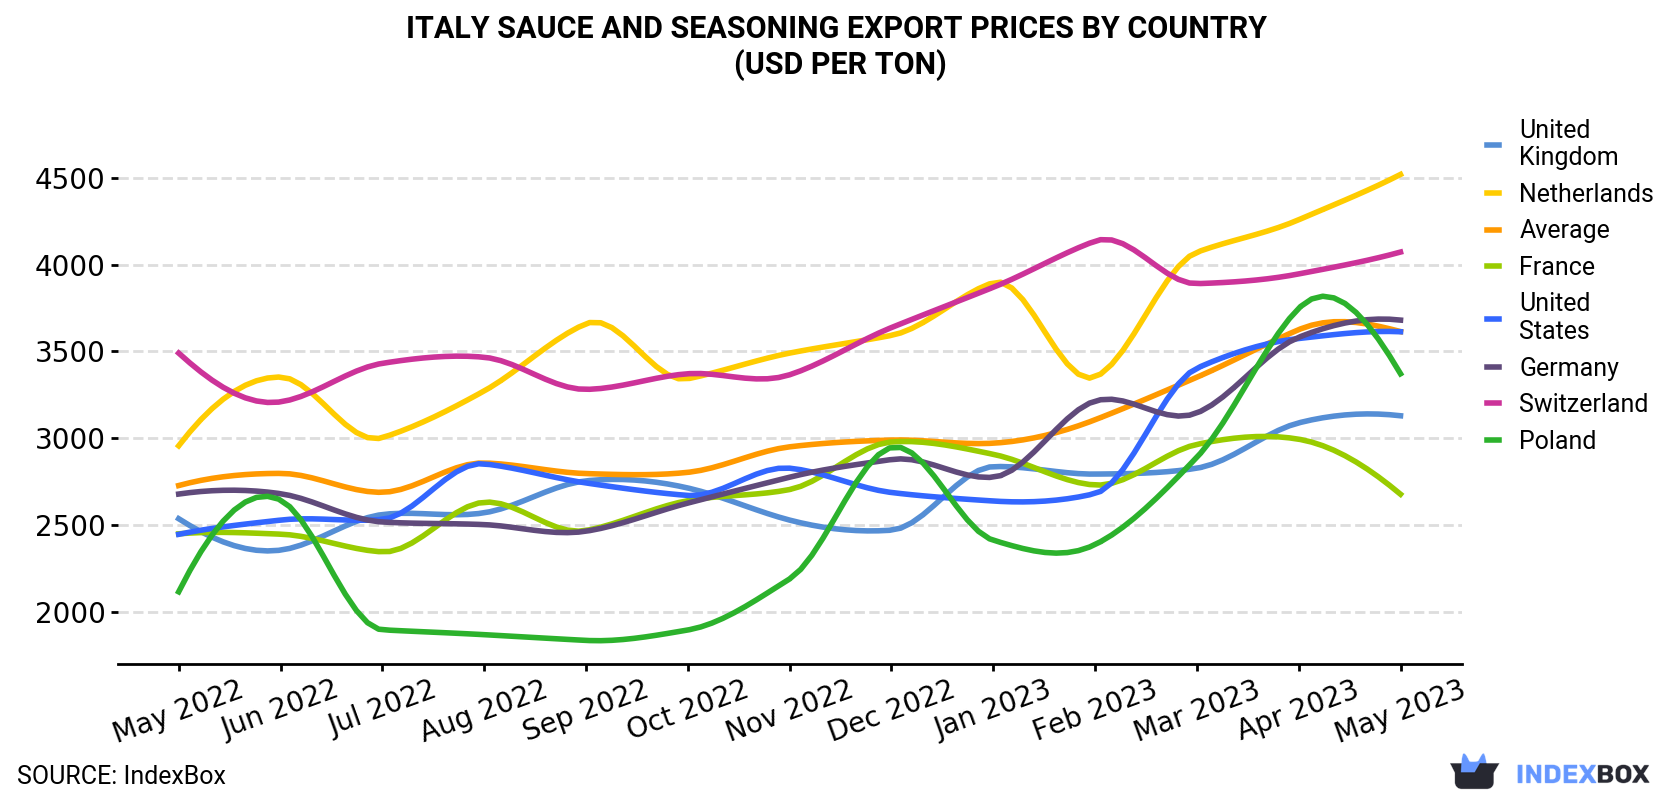 Italy Sauce and Seasoning Export Prices By Country (USD Per Ton)